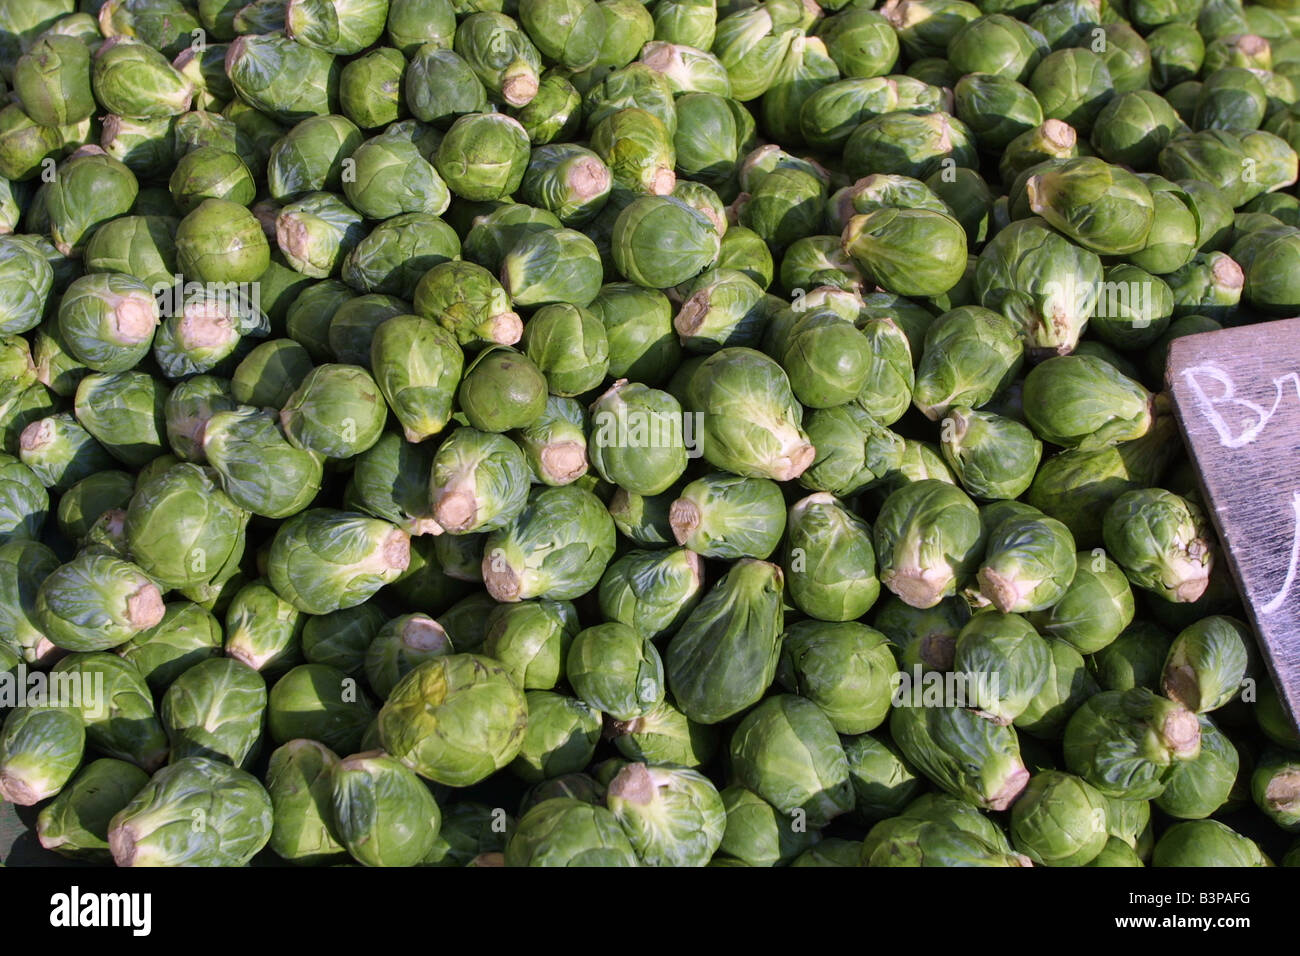 Green brussells sprouts for sale on market. France Bussellsprout_10157 Stock Photo